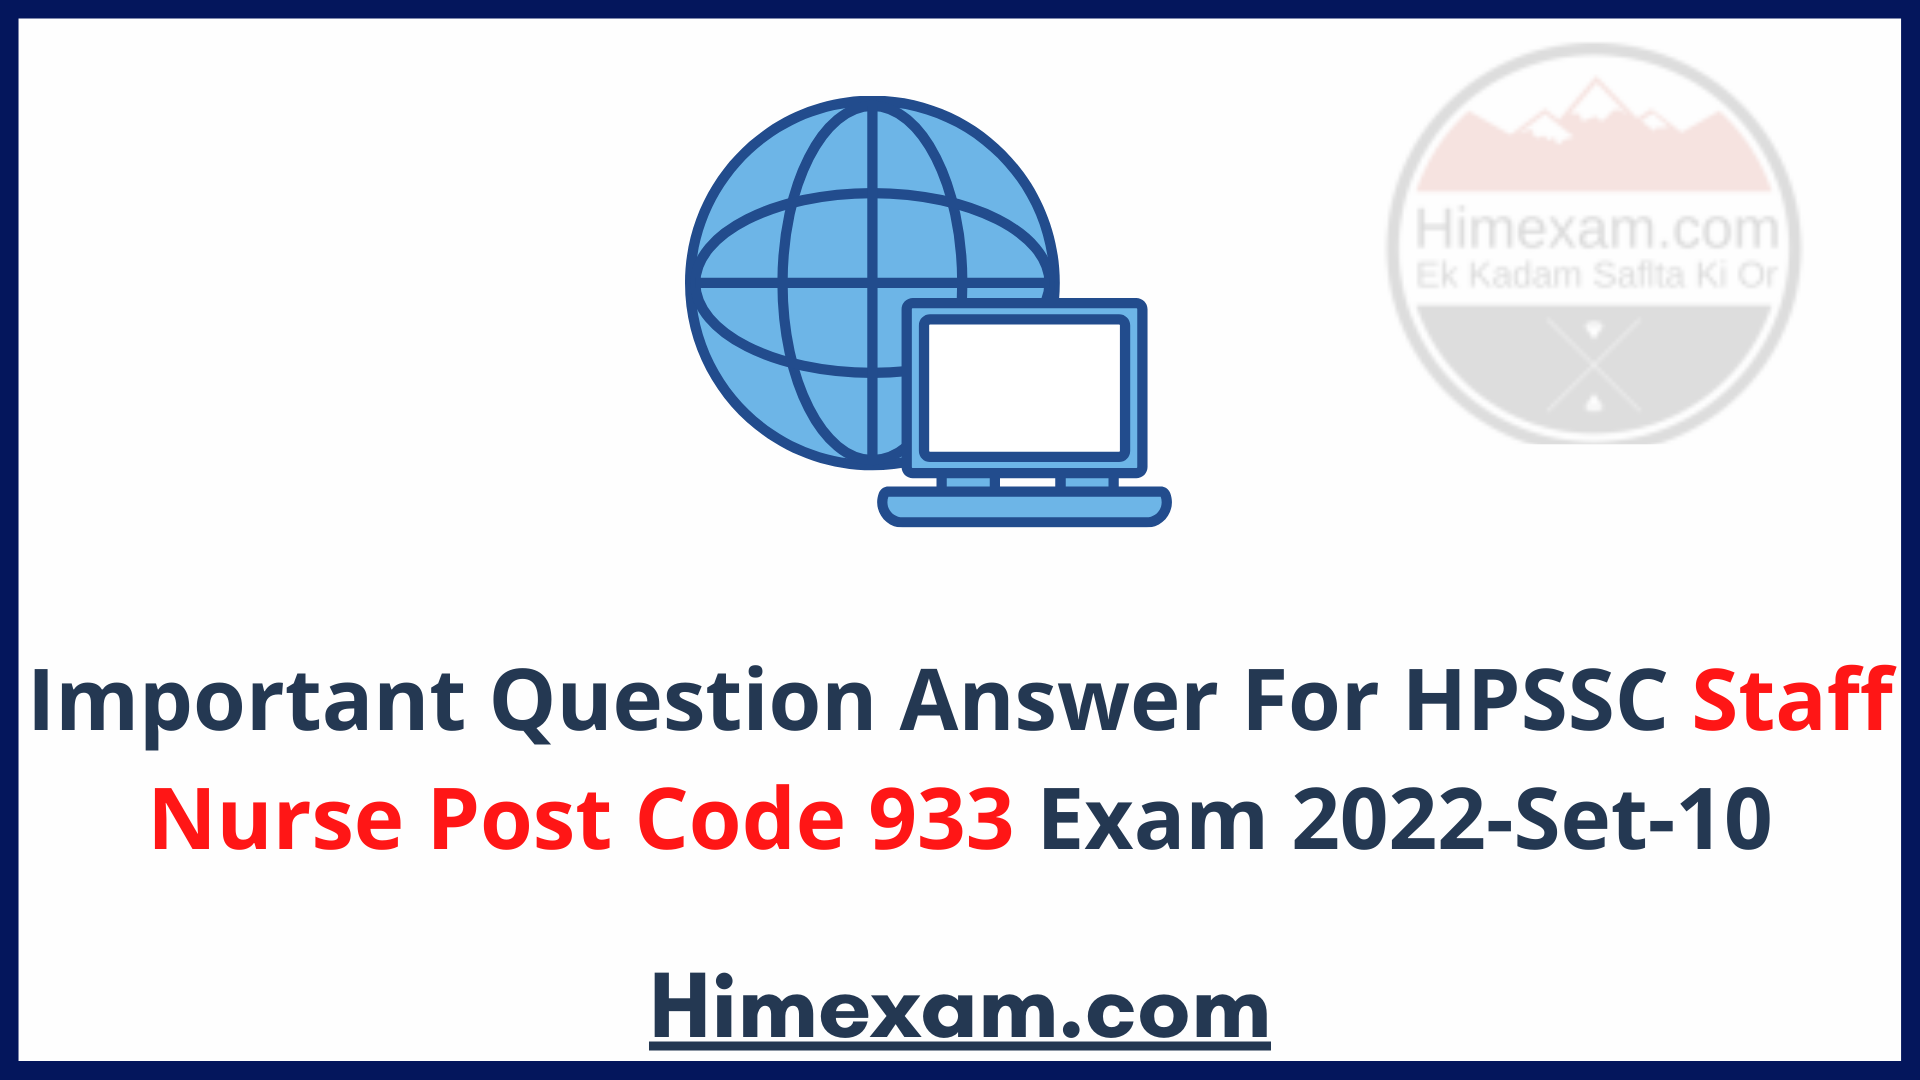 Important Question Answer  For HPSSC Staff Nurse Post Code 933 Exam 2022-Set-10